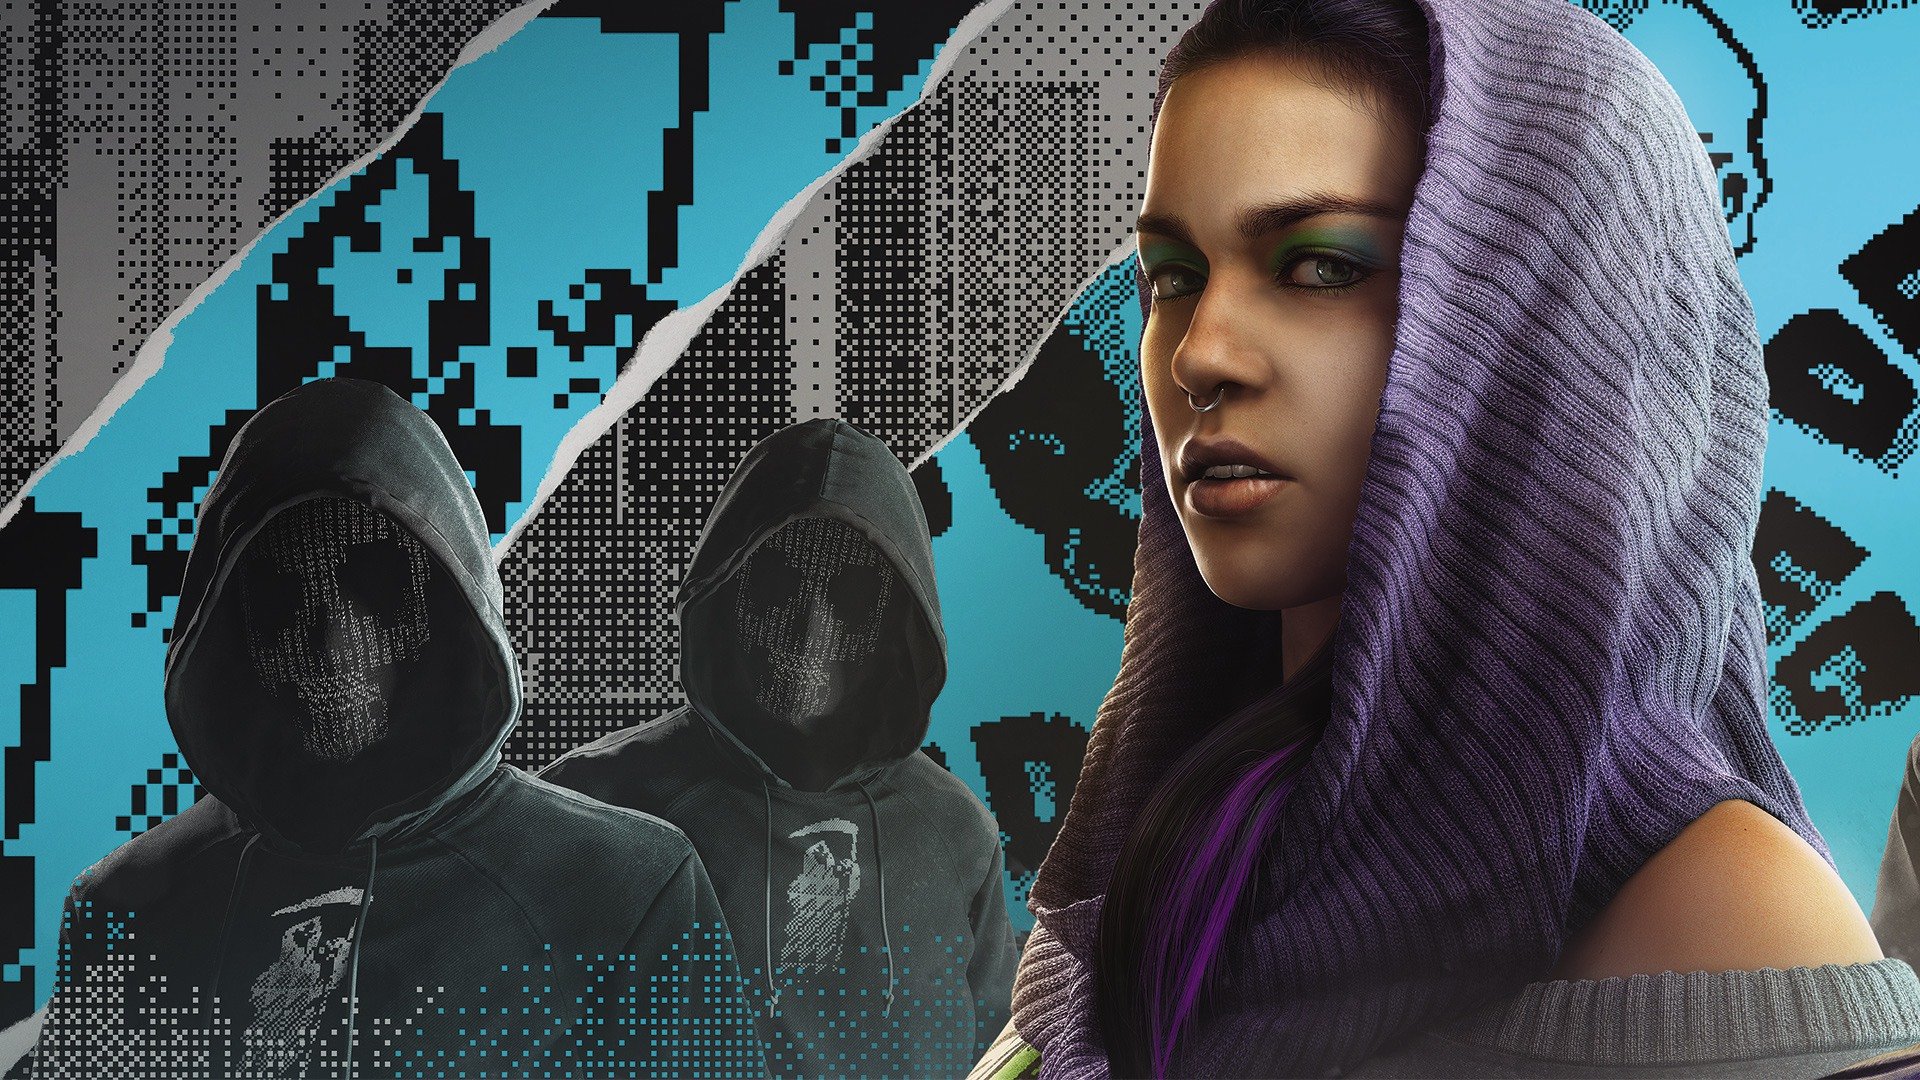 Free Watch Dogs 2 high quality wallpaper ID:366055 for 1080p PC